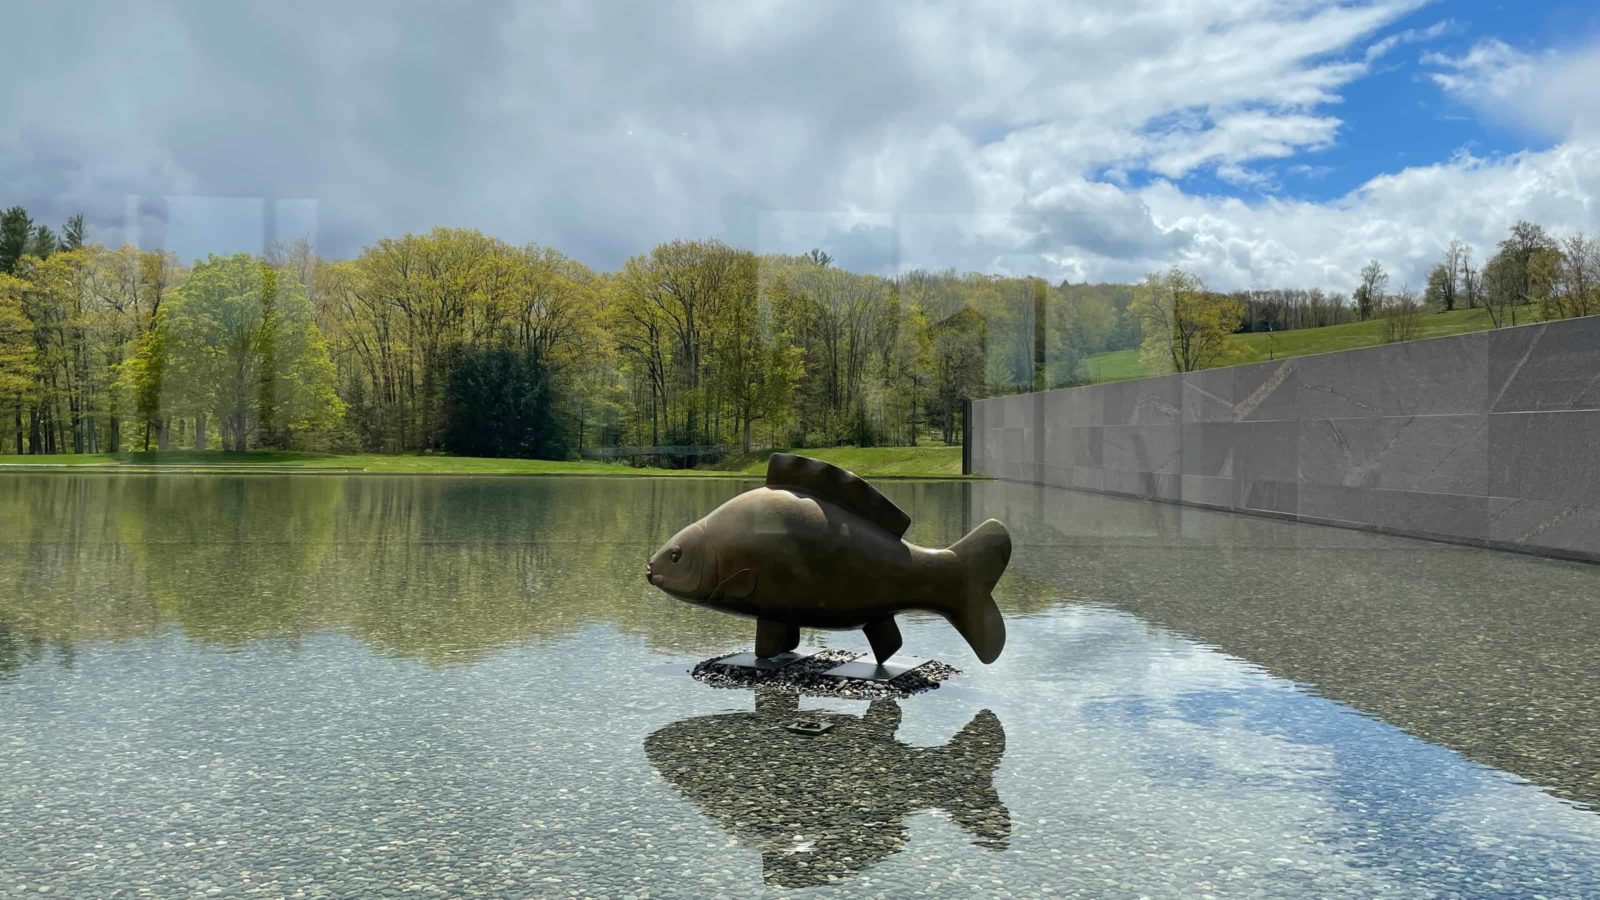 François-Xavier Lalanne's carp hovers over the reflecting pool in Nature Transformed at the Clark Art Institute.